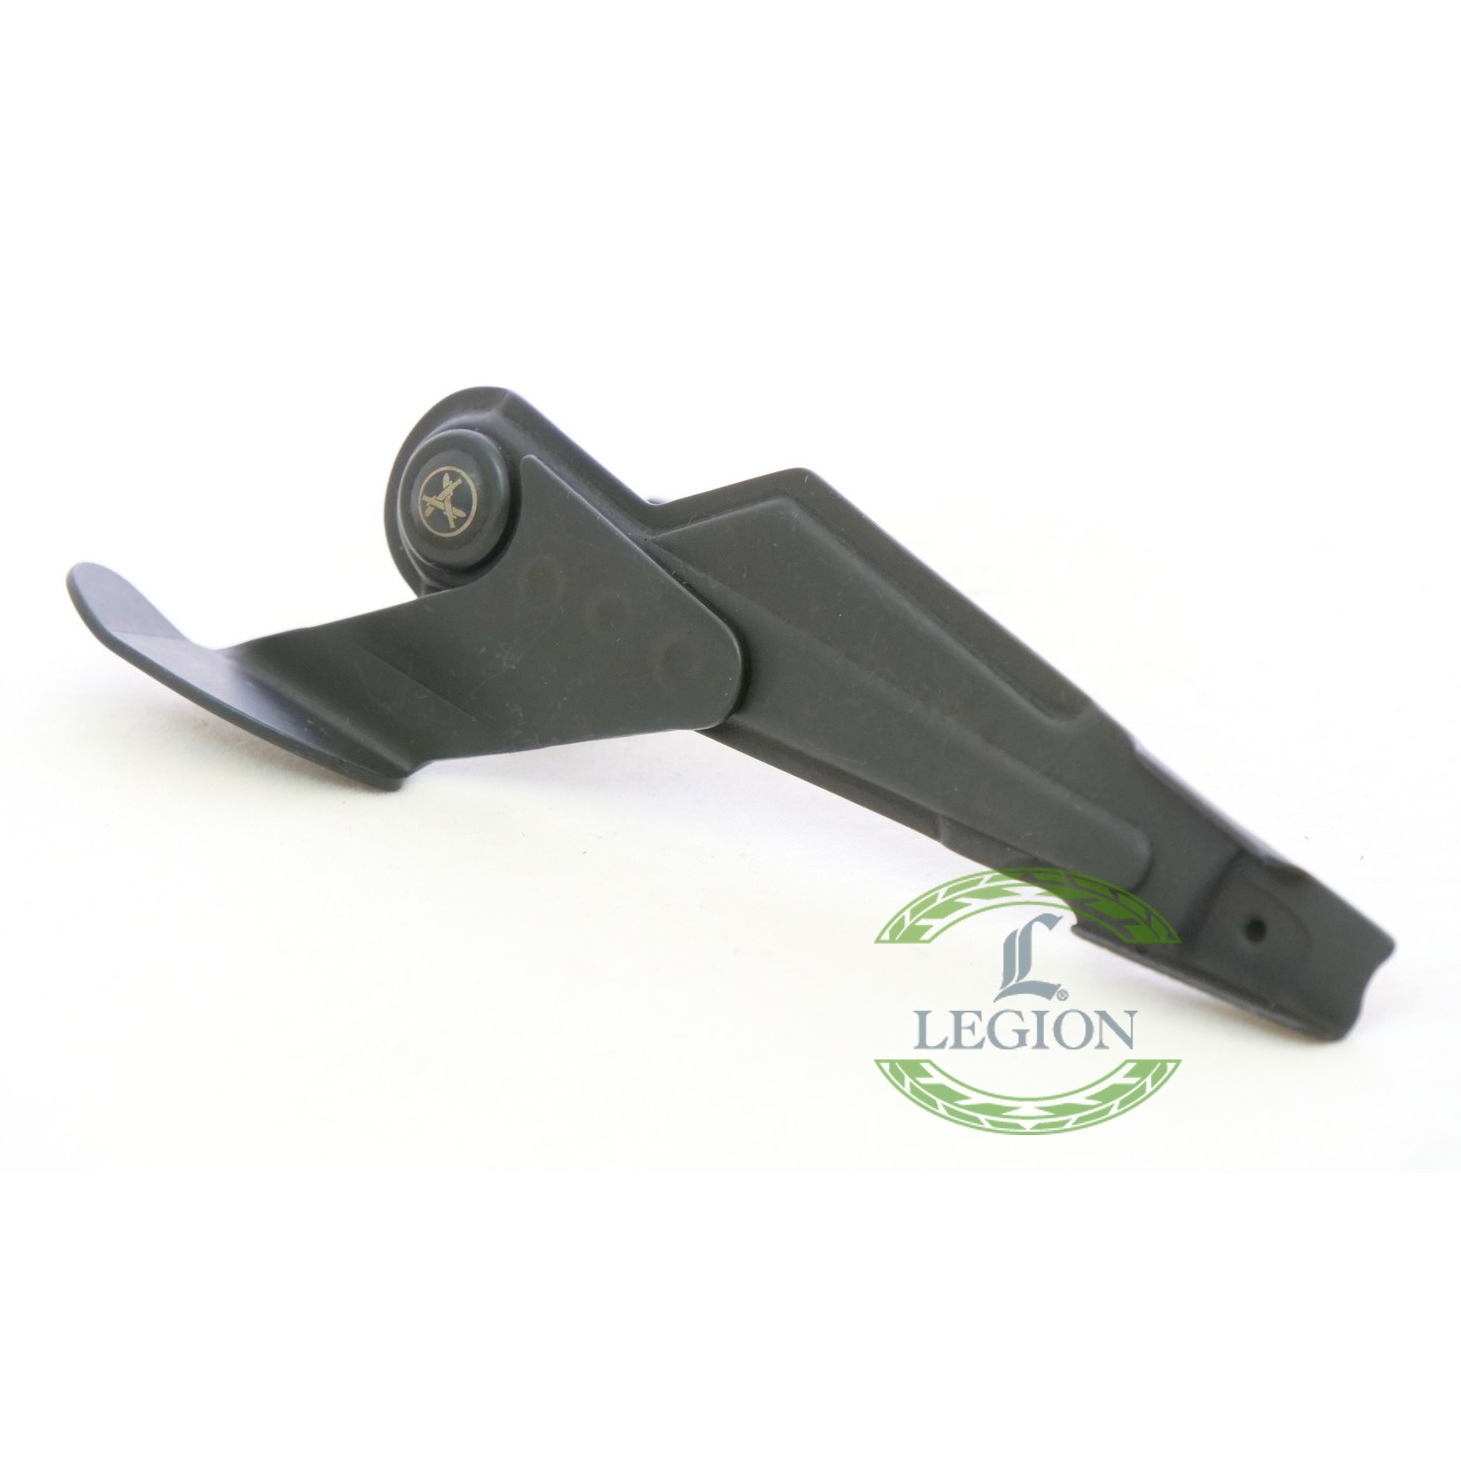 Buy AK Enhanced Safety Selector ARMACON at a low price in our weapons store...